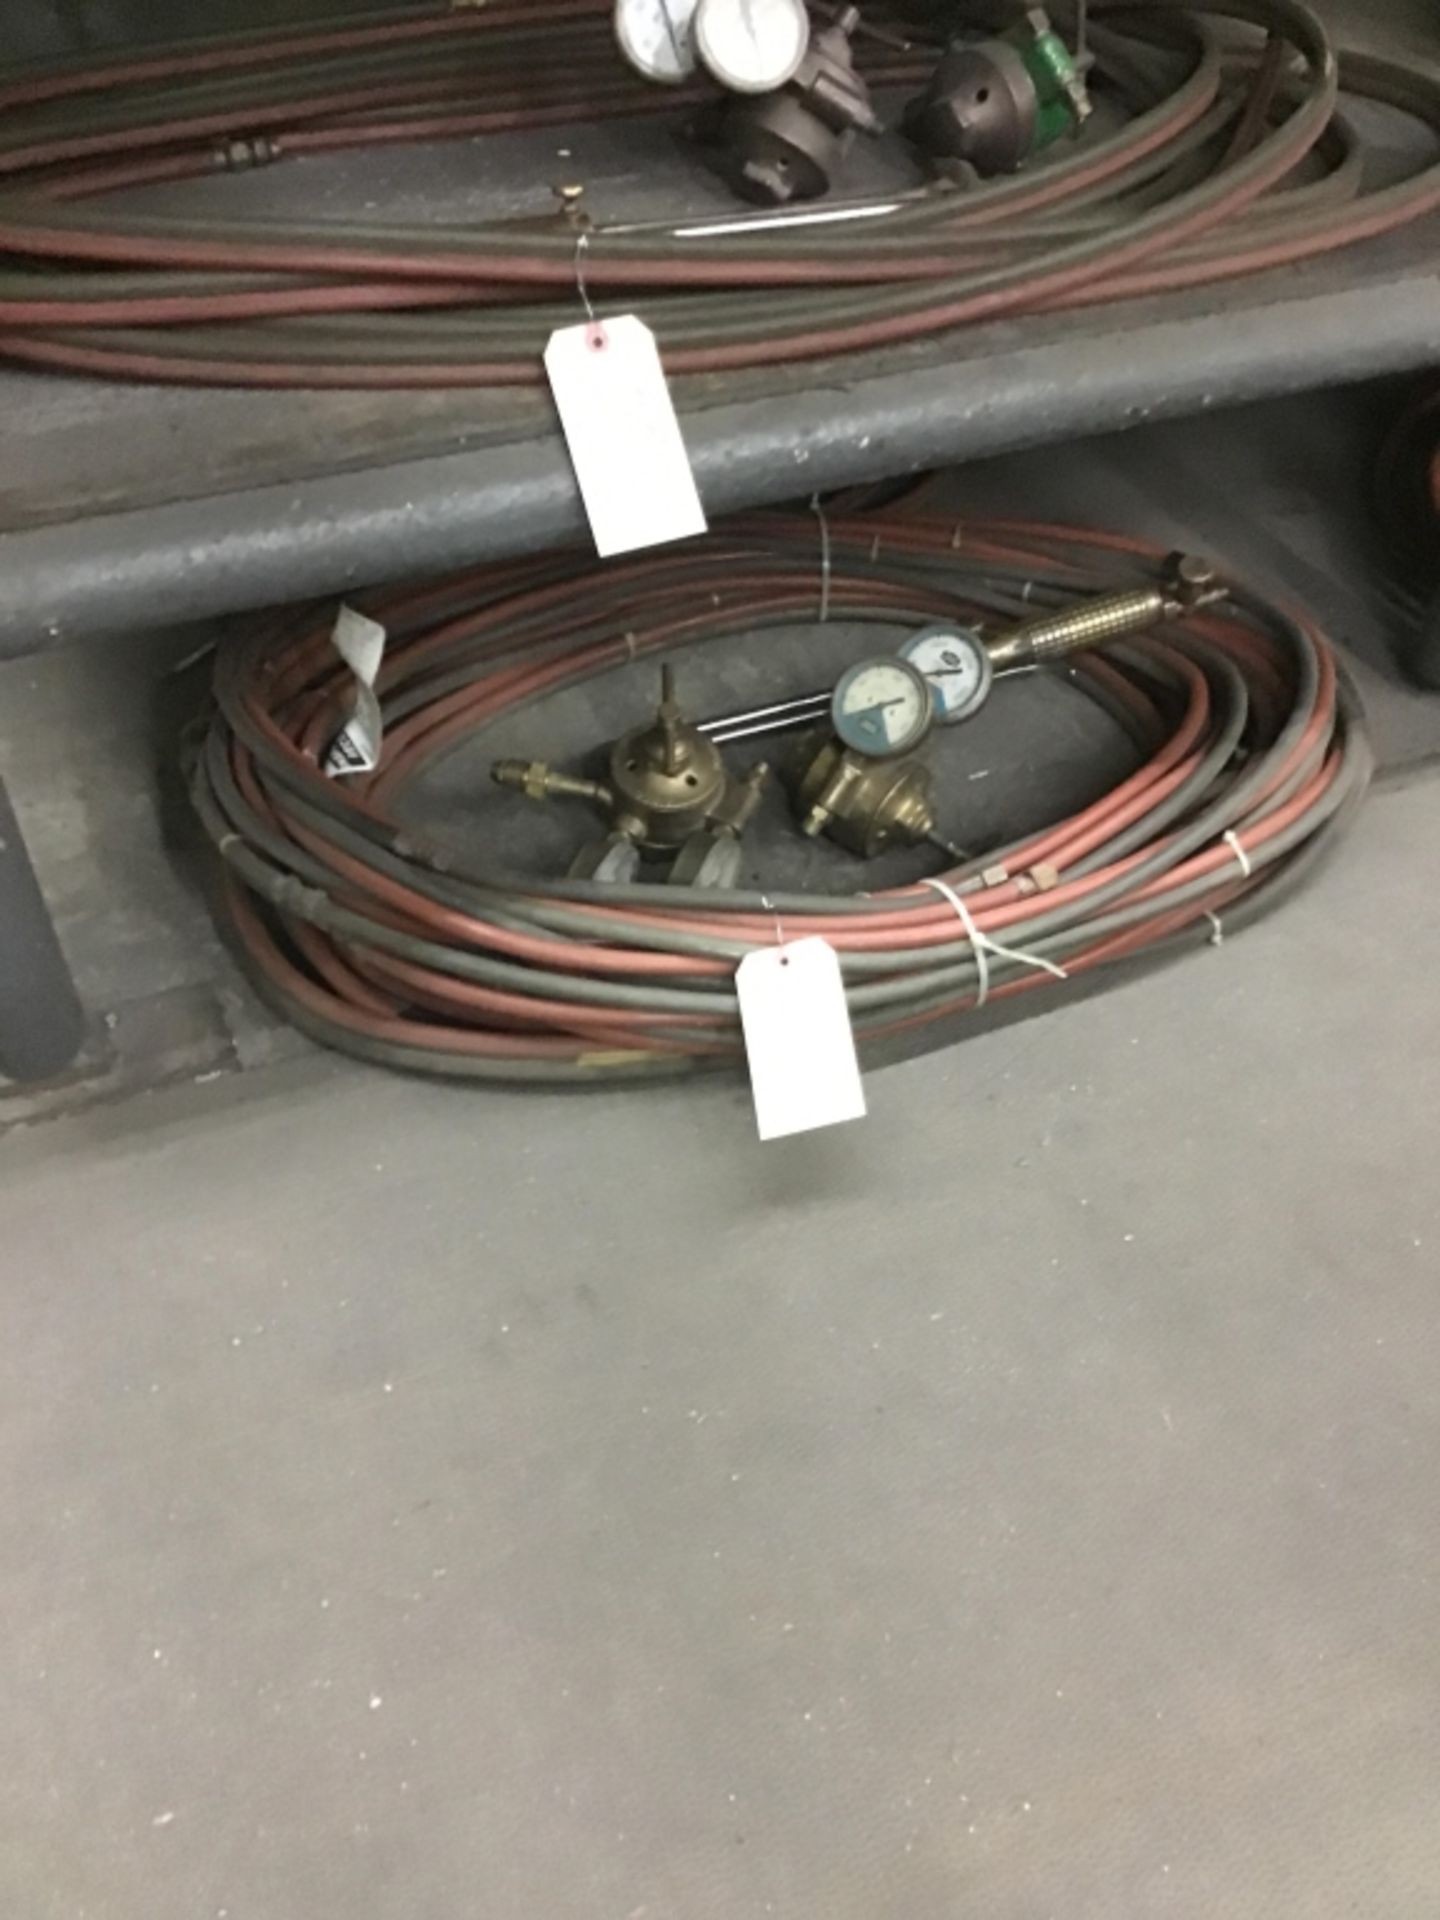 Welding gauges torch and hoses